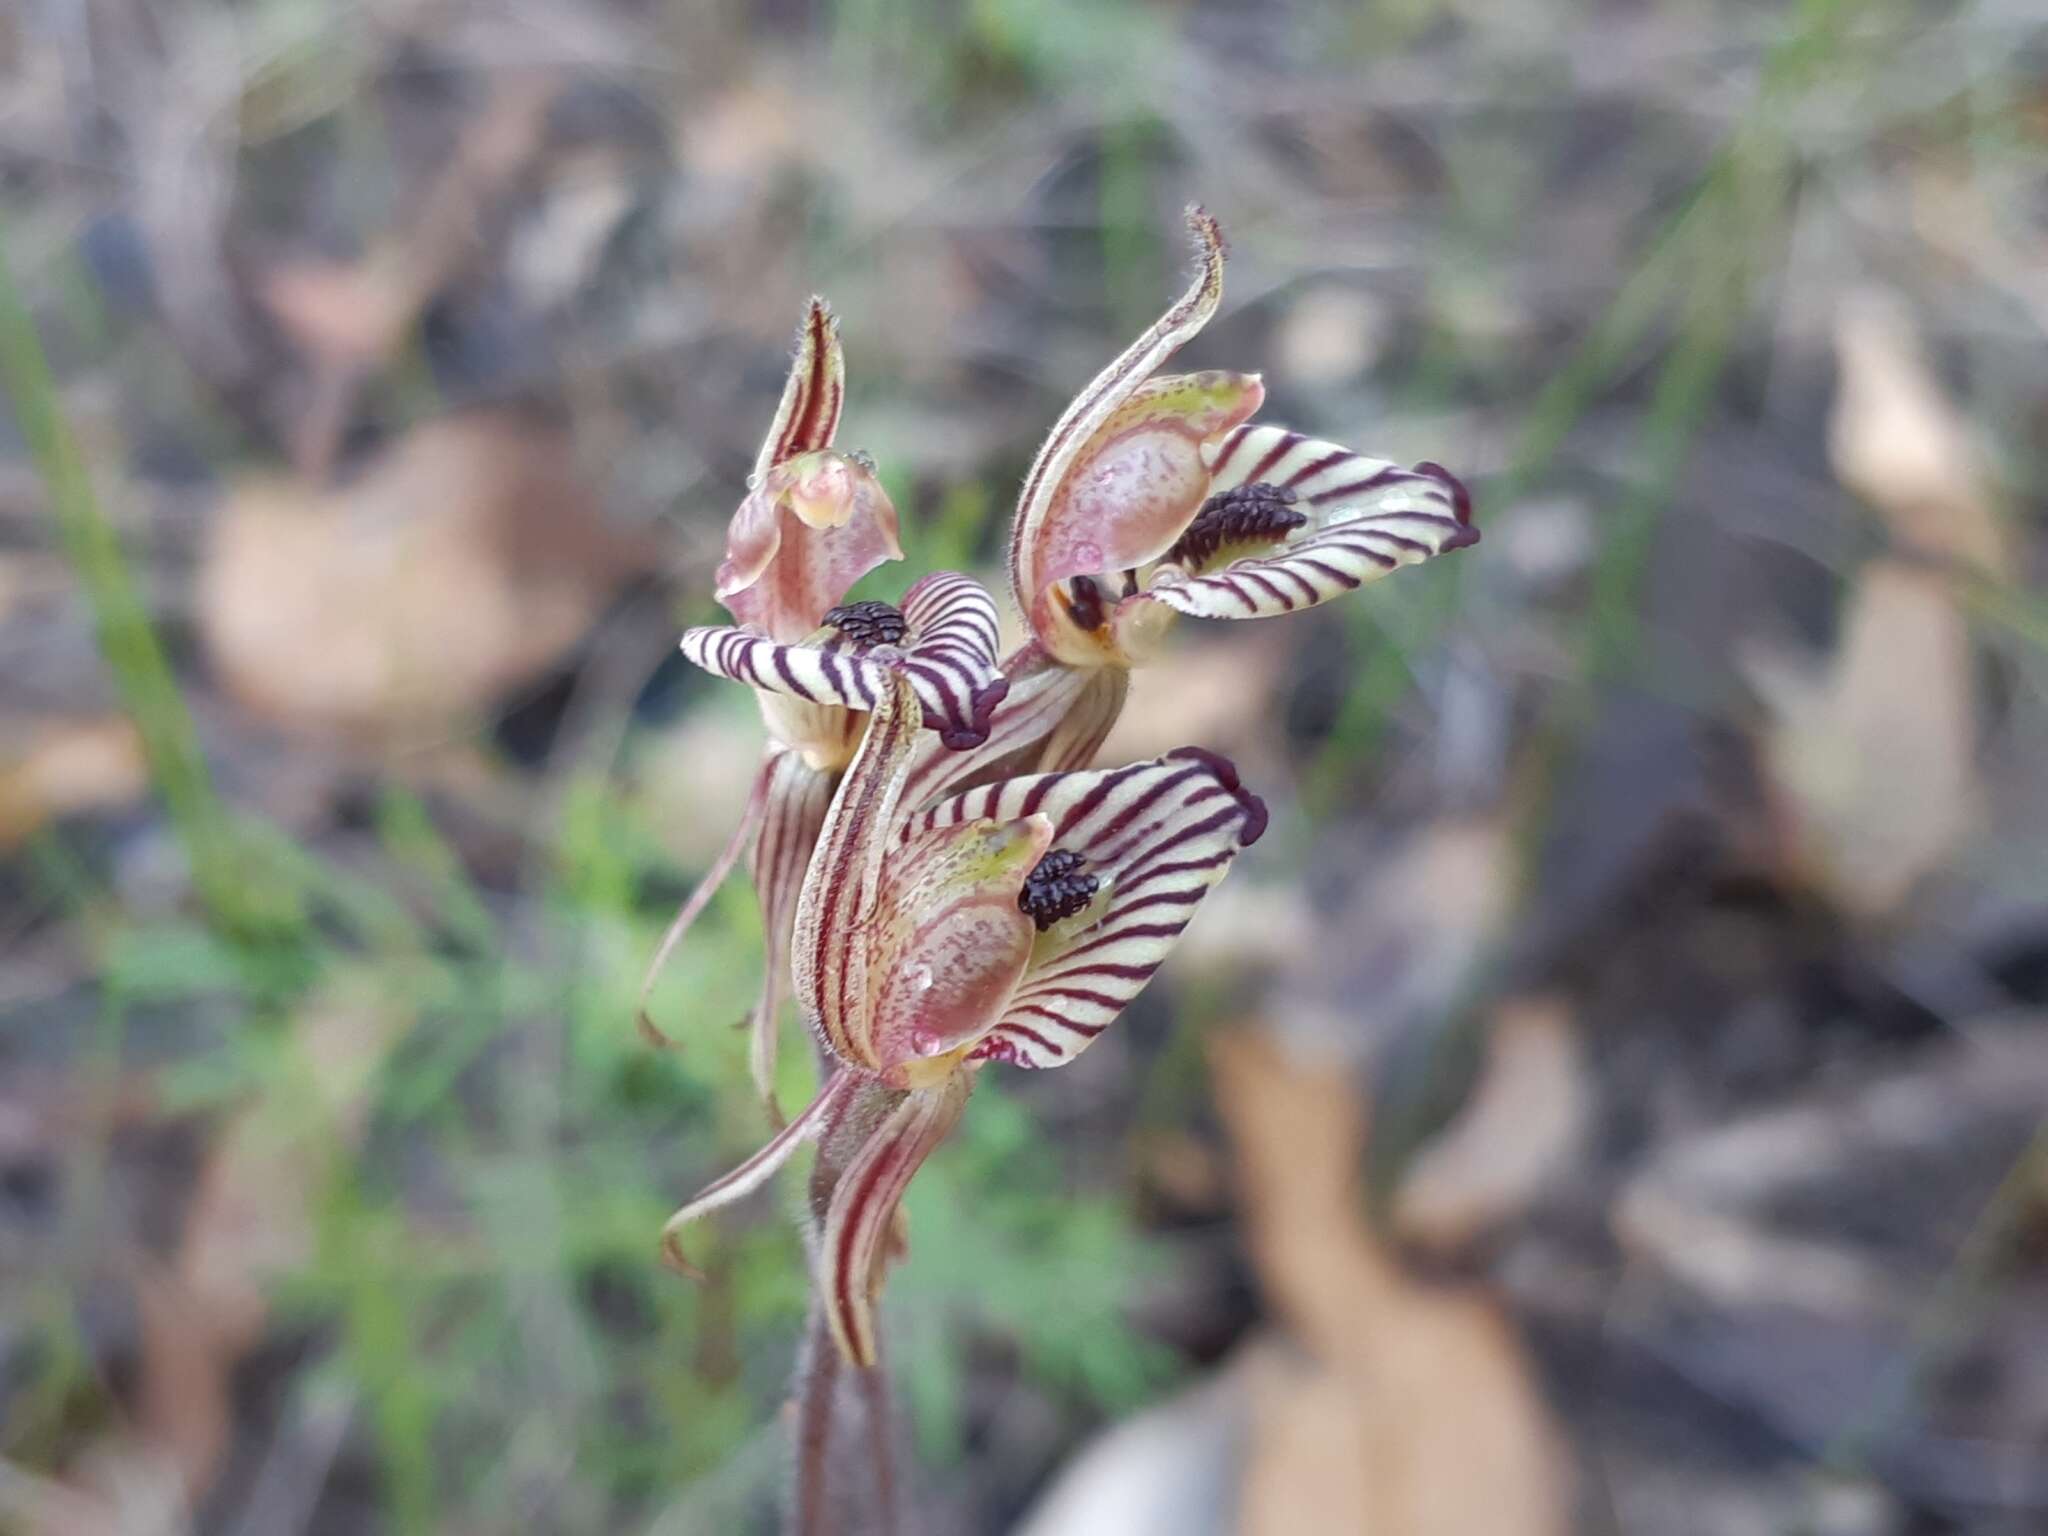 Image of Zebra orchid